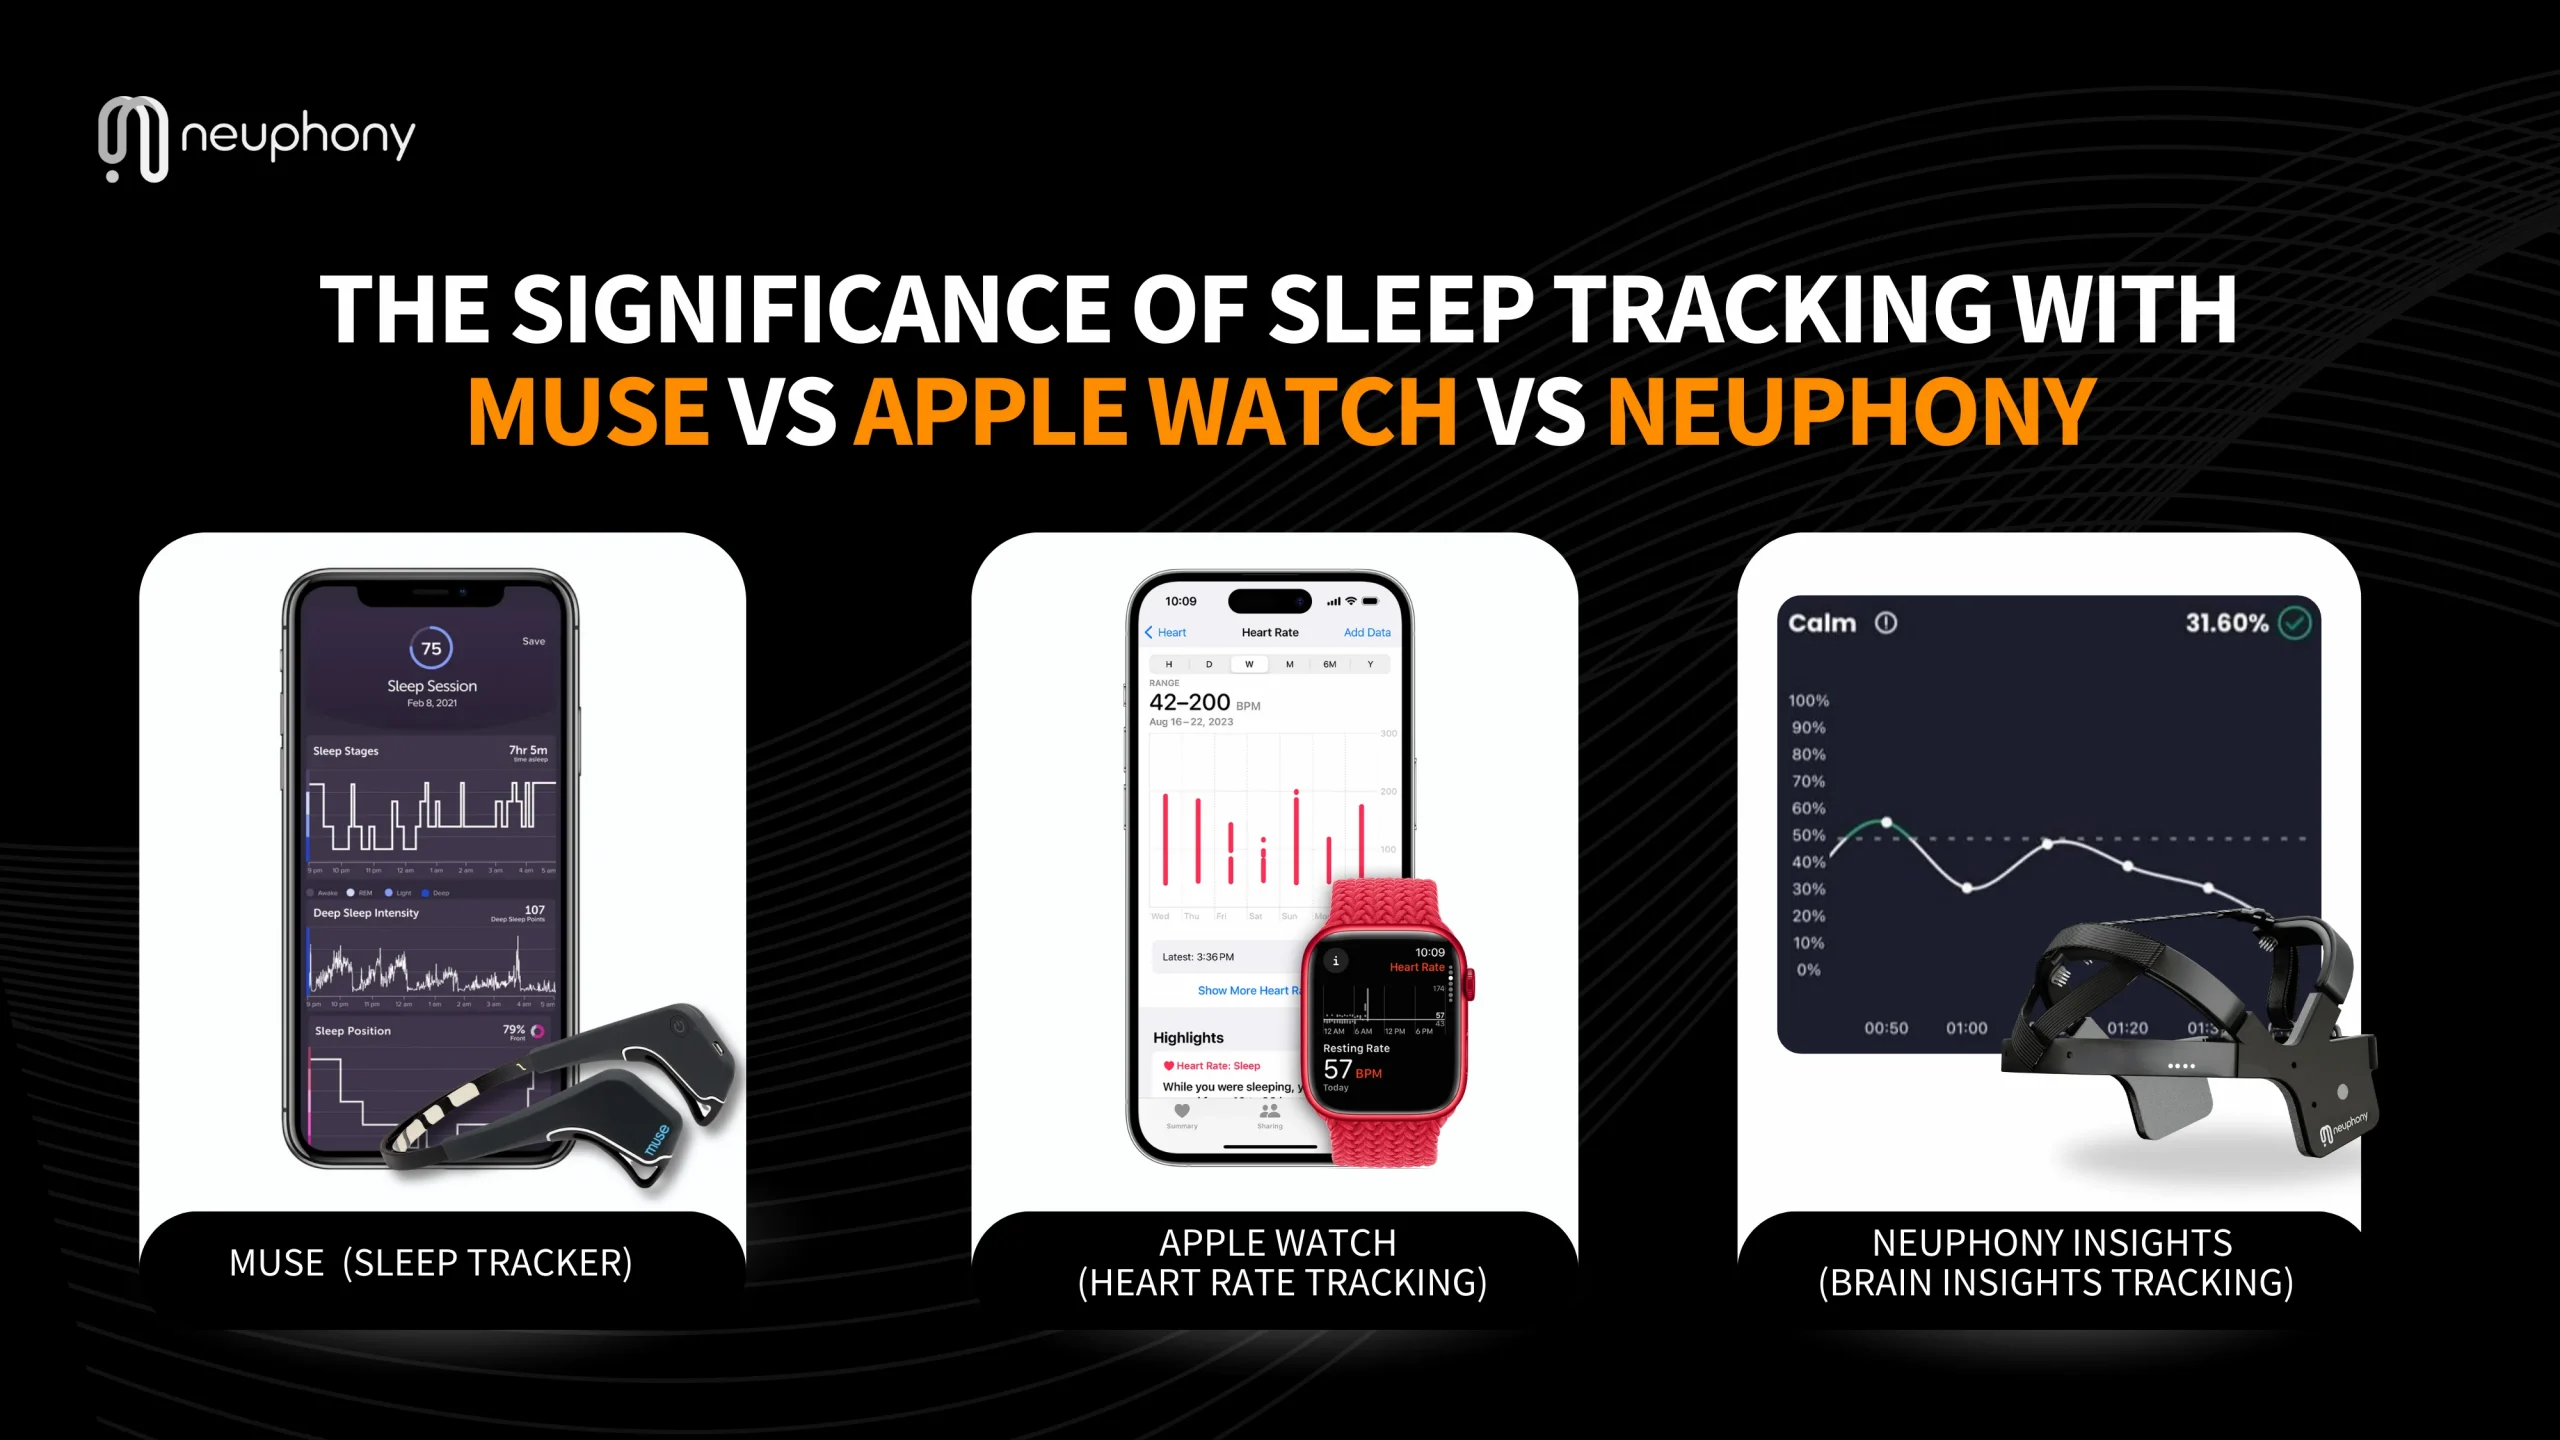 You are currently viewing The Significance of Sleep Tracking with Muse vs. Apple Watch and its Impact on My Neuphony Score